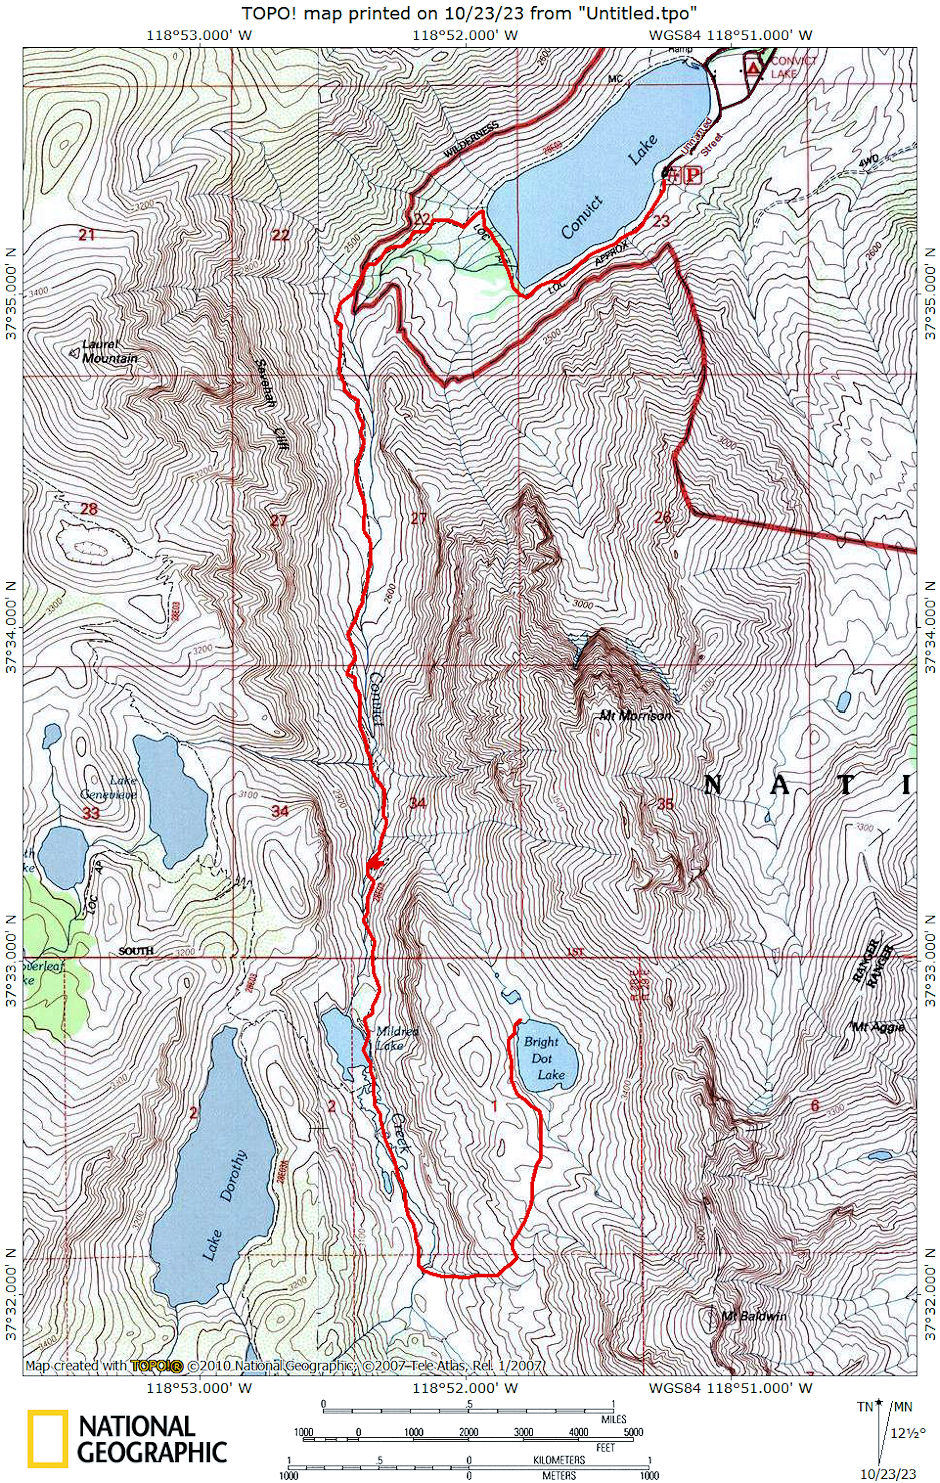 Route for thire Convict Creek backpack 1976